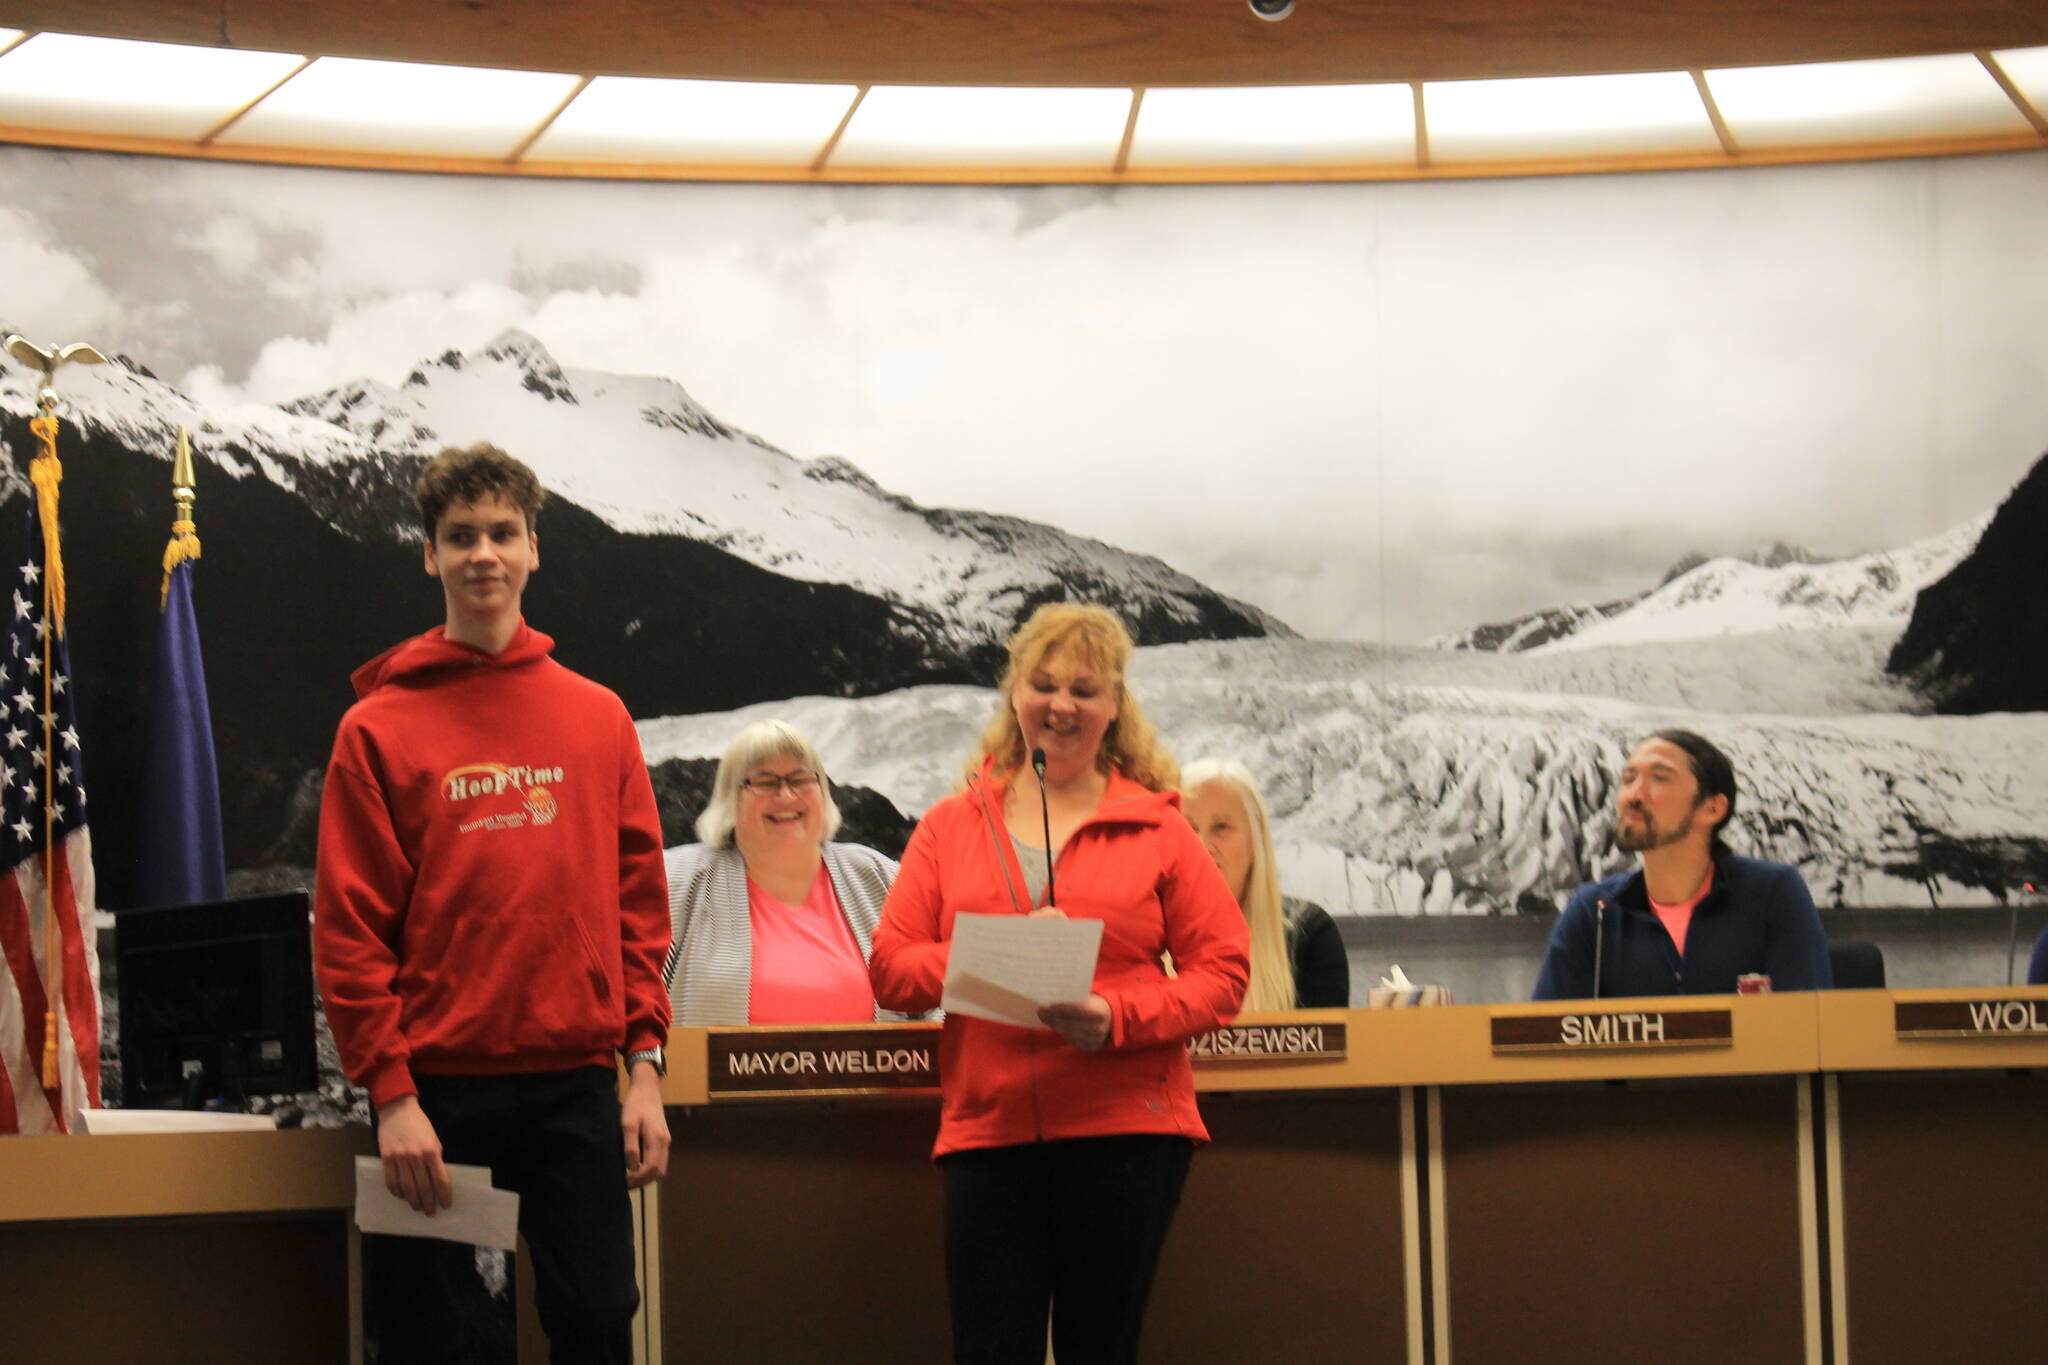 Ivan and Iryna Hrynchenko give a short speech at the City Borough of Juneau Assembly meeting Monday night. The mother and son duo are the first refugees from the war in Ukraine to be welcomed to the capital city after their hometown suffered Russian attacks and forced them to flee. (Clarise Larson / Juneau Empire)